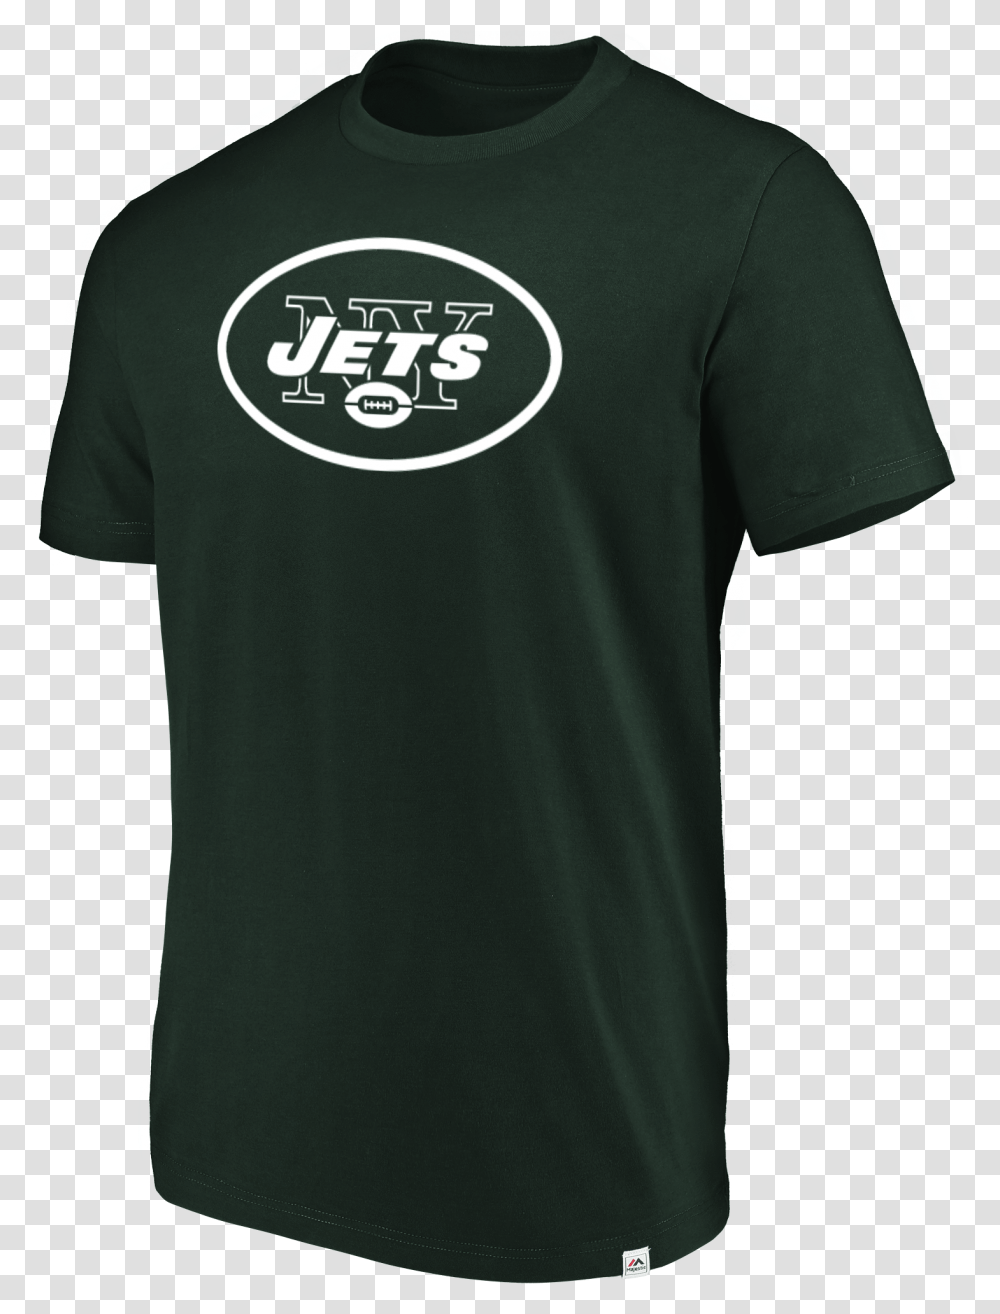 Logos And Uniforms Of The New York Jets, Apparel, T-Shirt Transparent Png